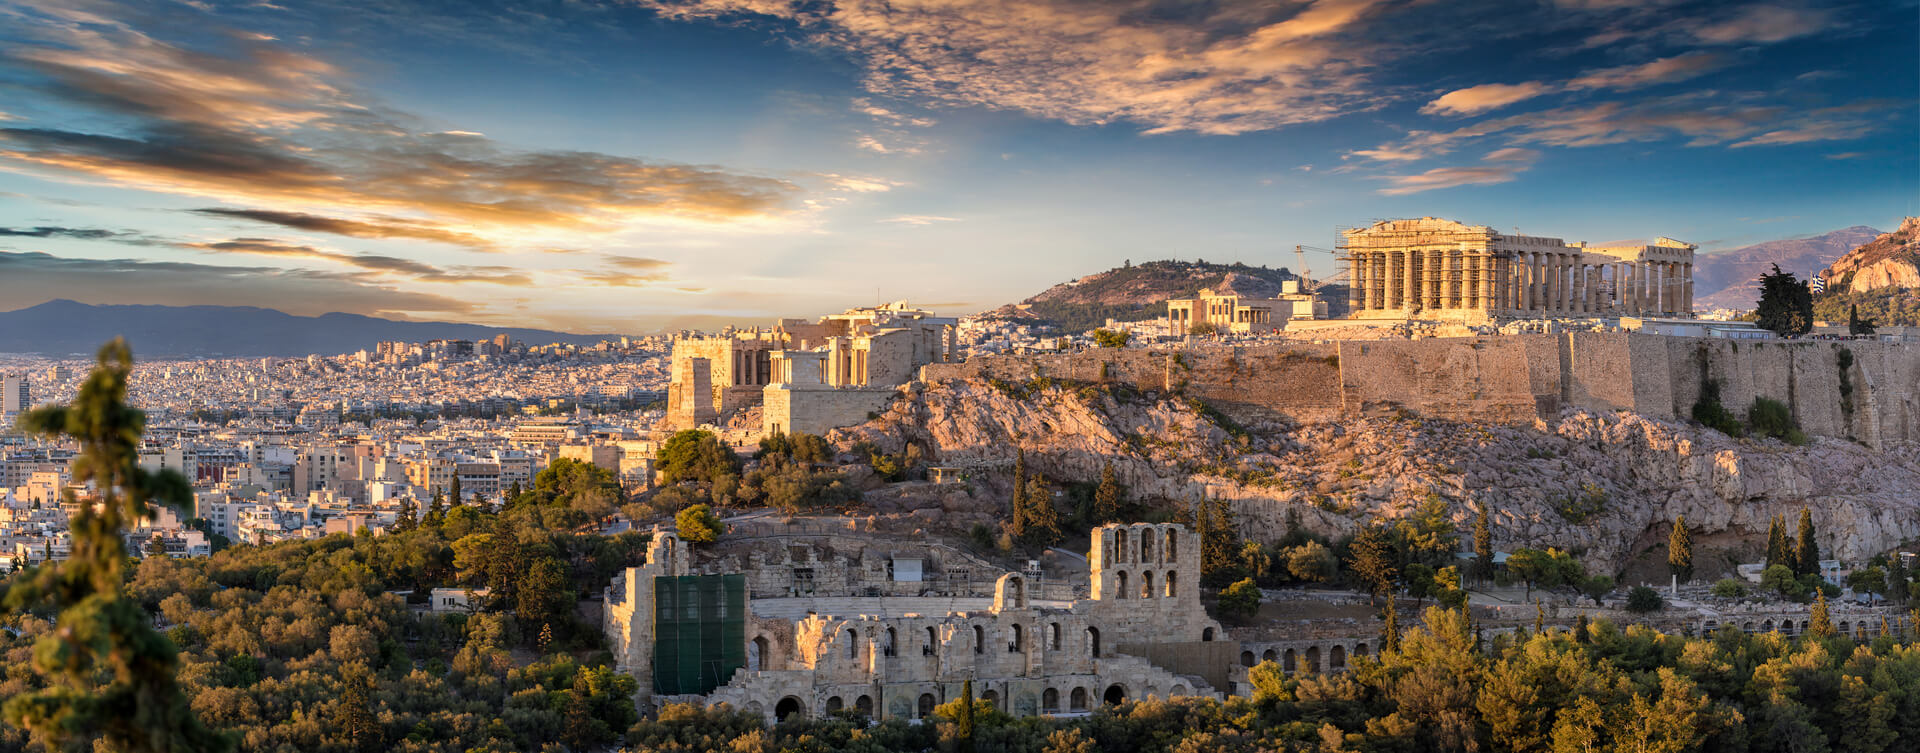 The Acropolis of Athens, Greece, with the Parthenon Temple during sunset
